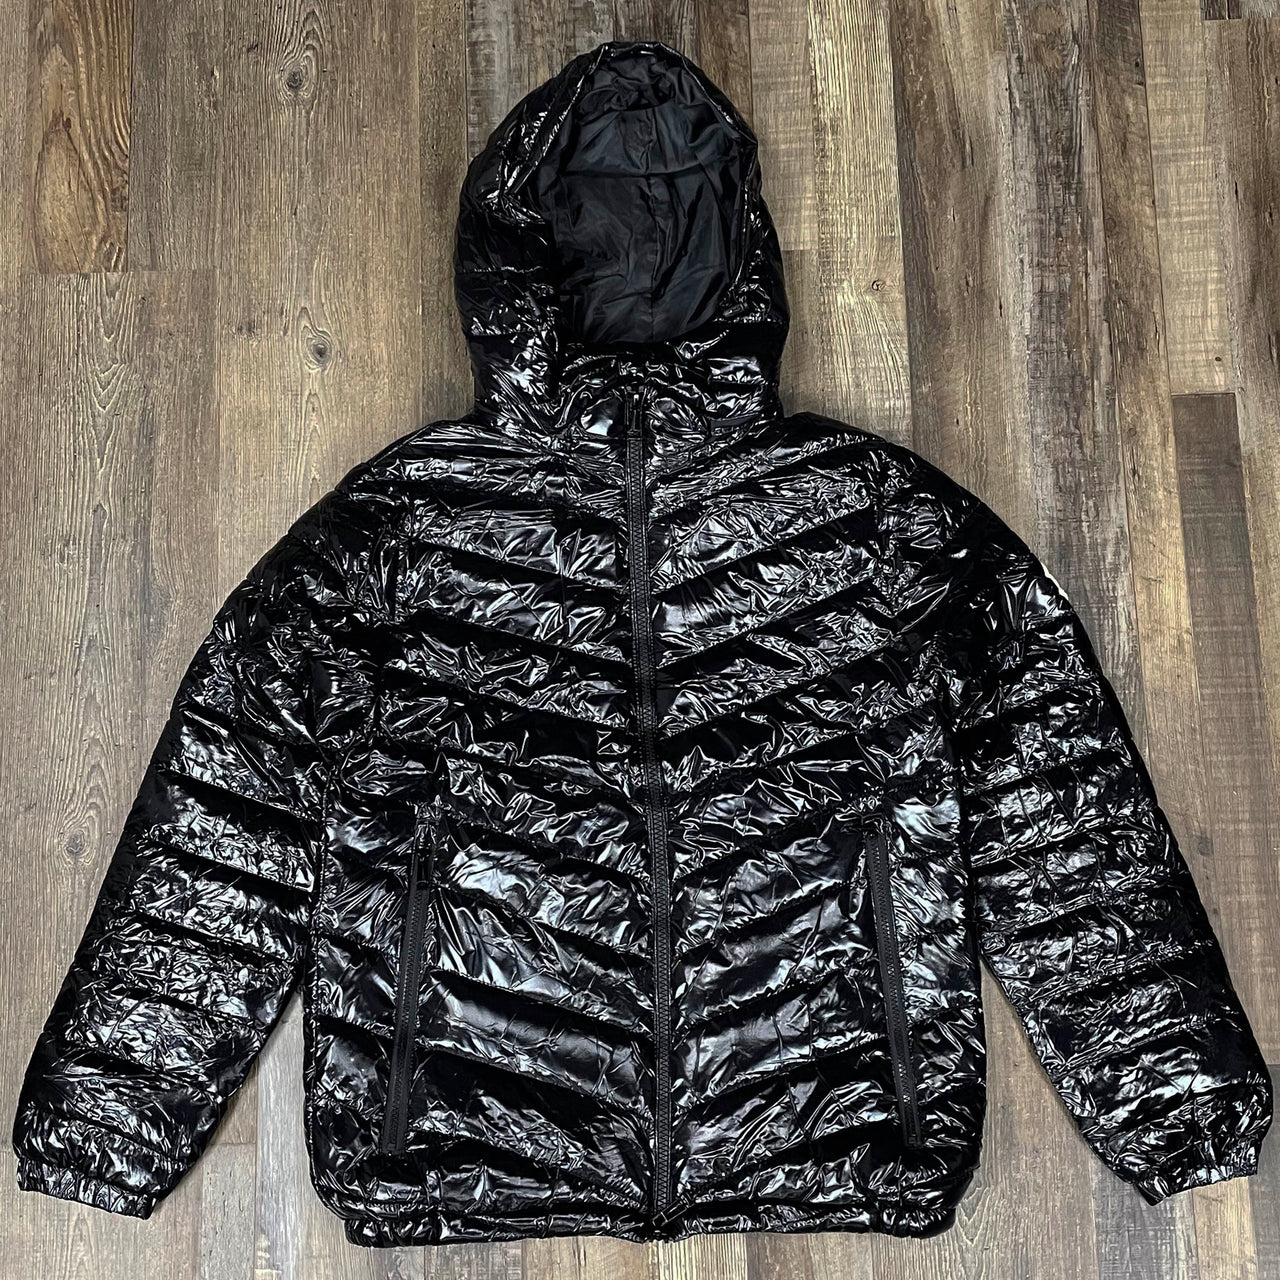 Glossy Metallic Shiny Men’s Puffer Jacket with Removable Hood | Black